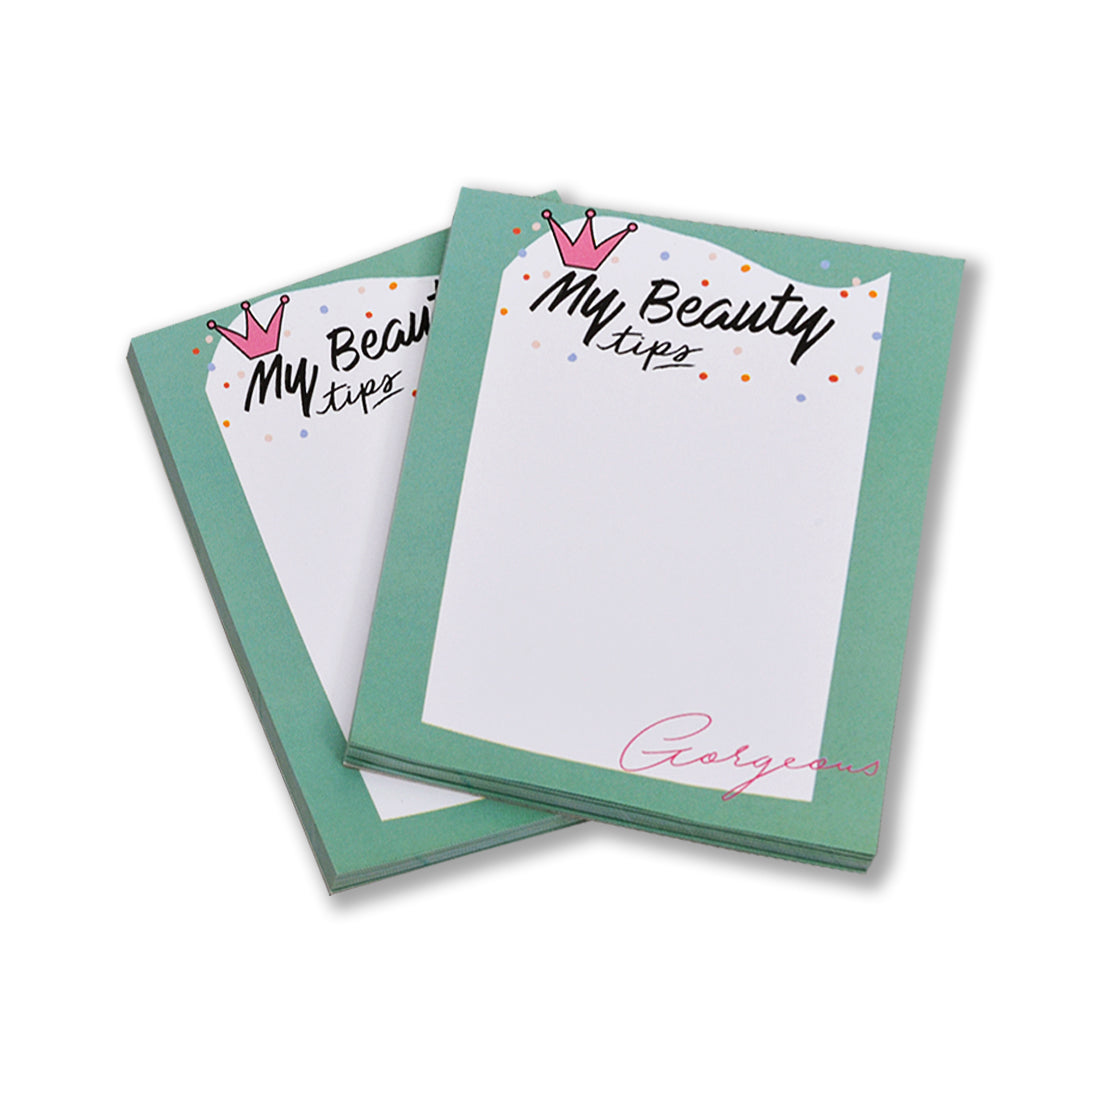 Desk Notepad, To Do List Planner, 50 Tear Off Sheets for Grocery, Shopping, Reminder, Checklist Set of 4